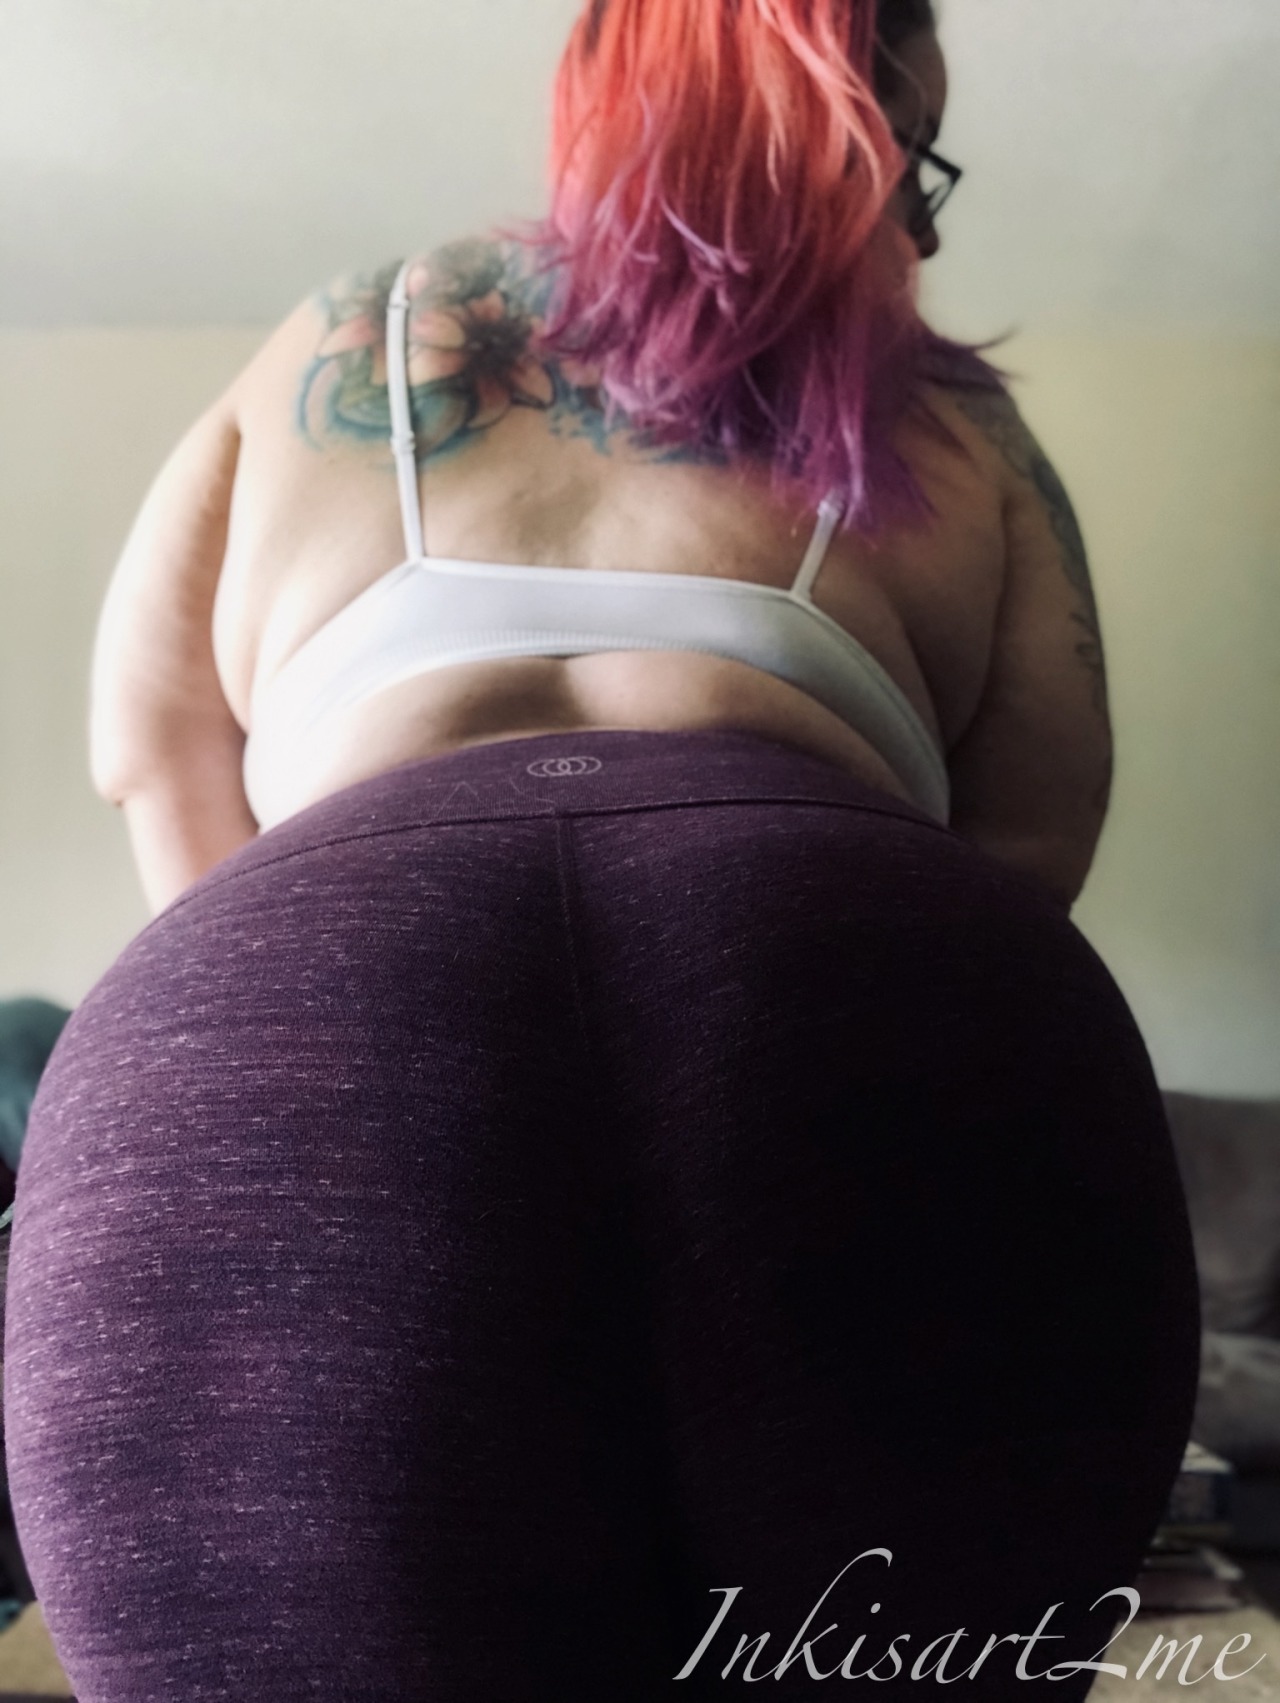 inkisart2me:Phat bottom girls make the 🤘🏻😎🌎🔄❣️For you juicy booty lovers 💋